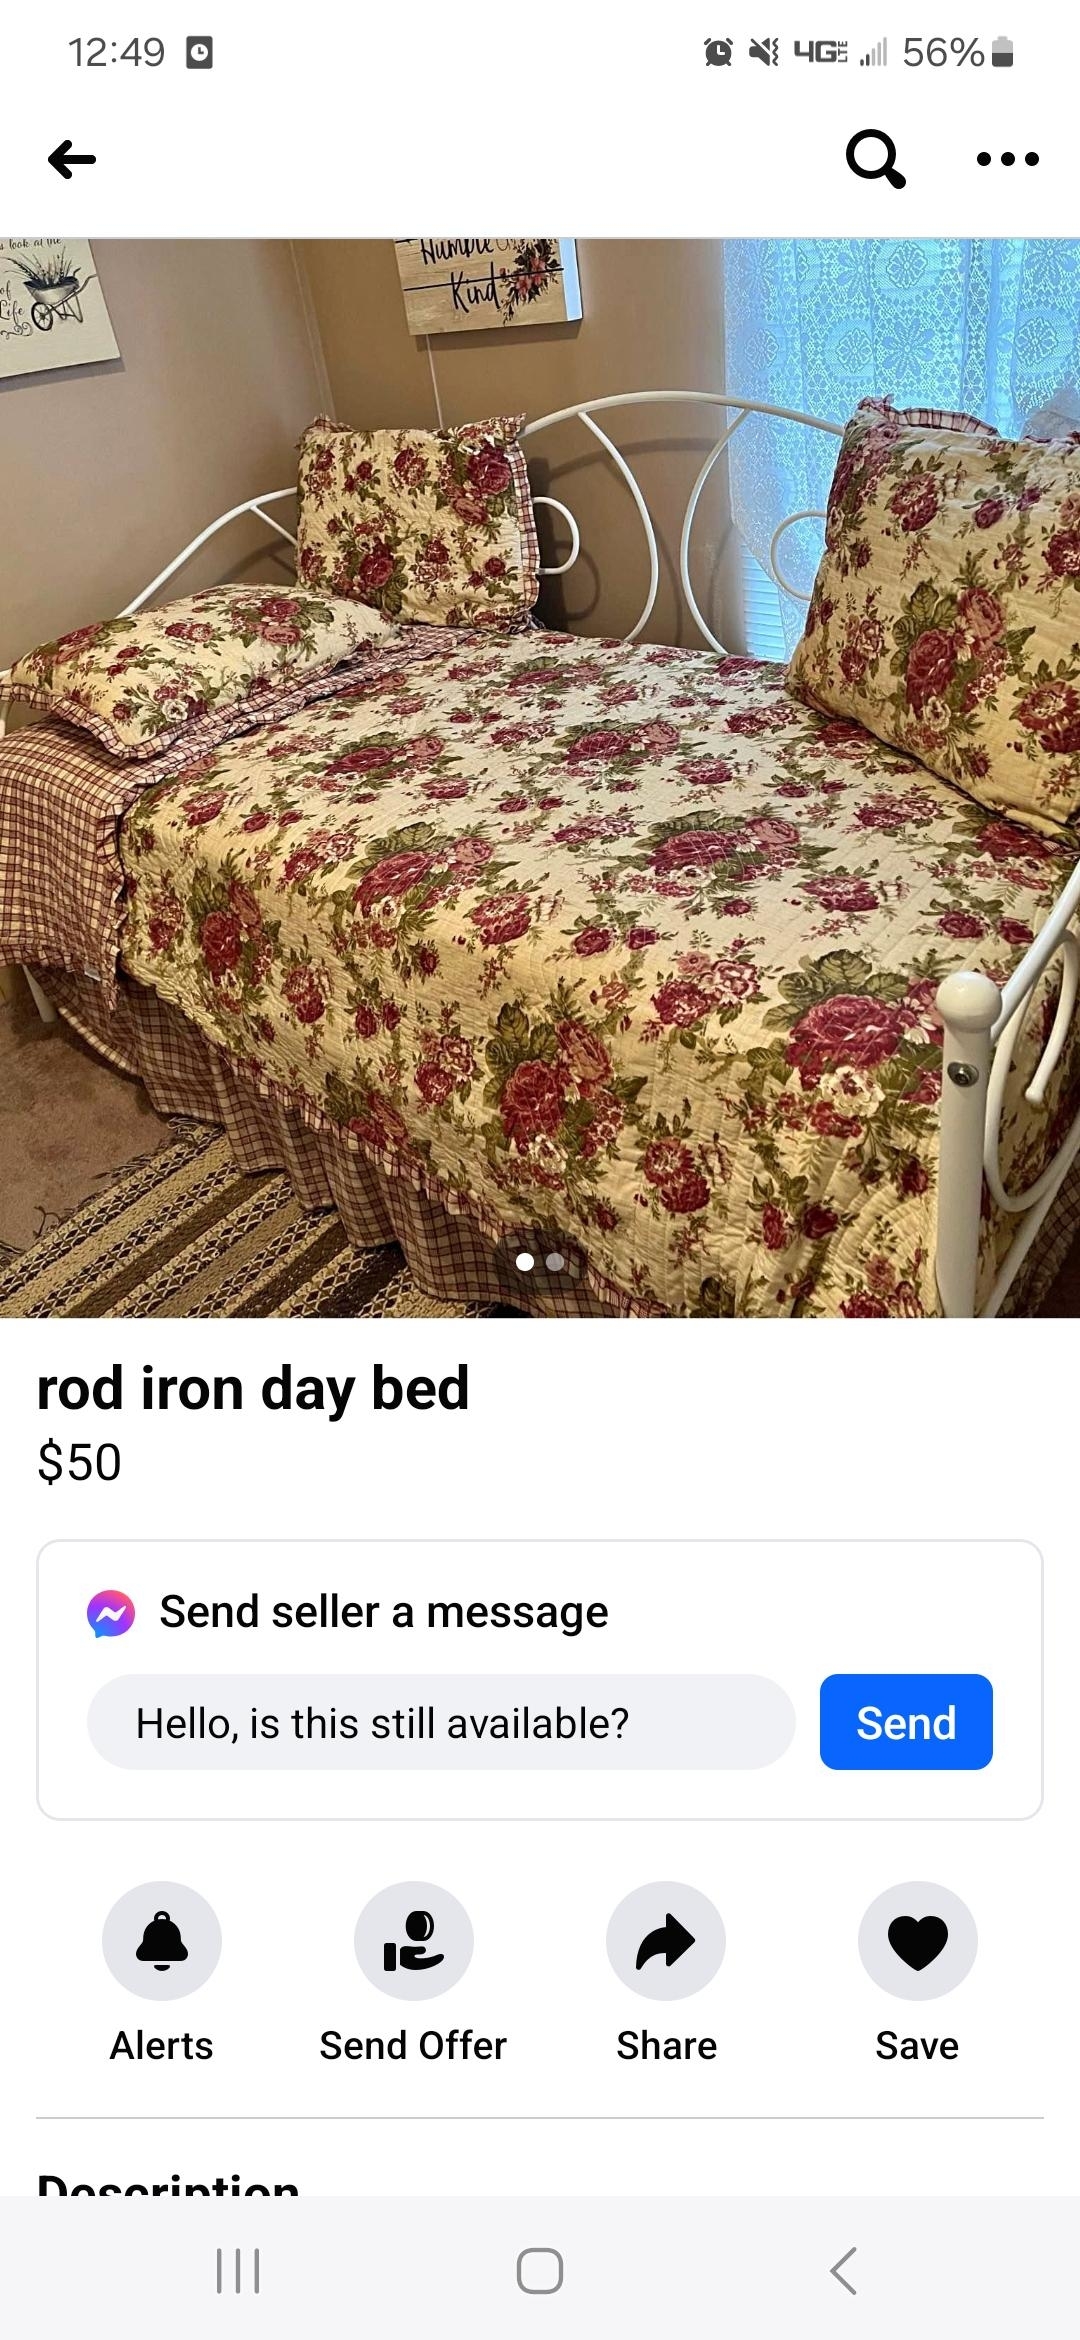 Photo of a rod iron daybed for sale with floral bedding in a bedroom setting